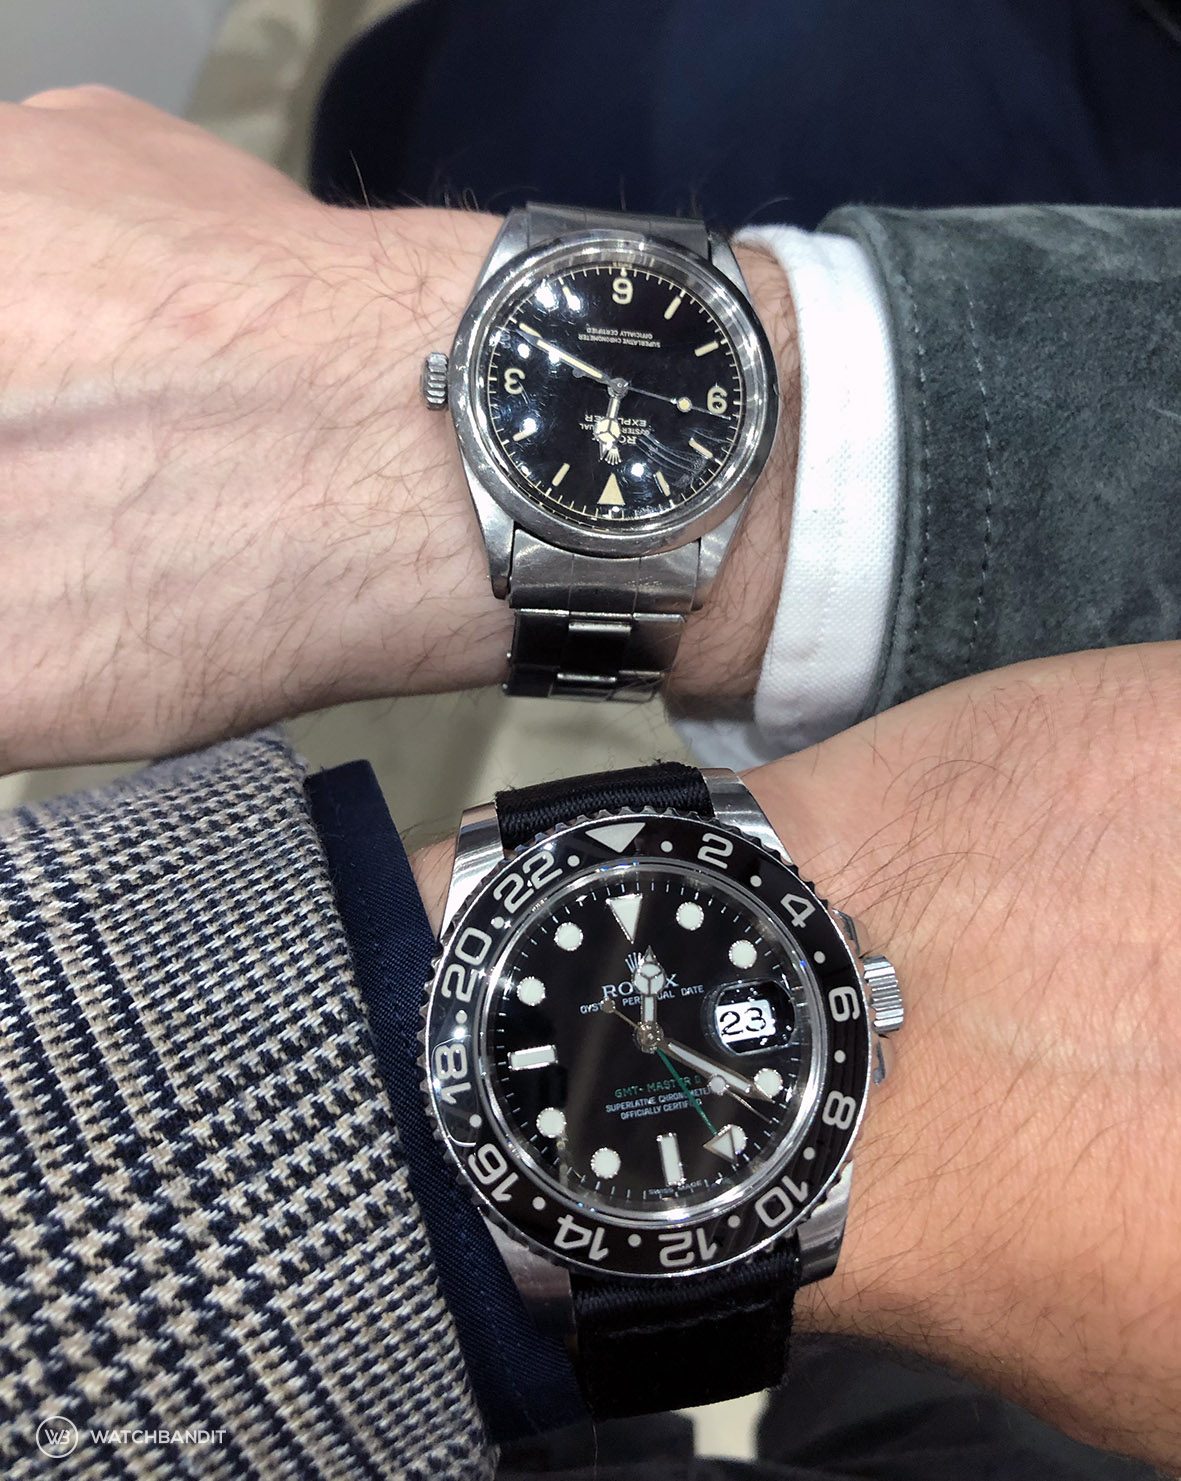 Stephen Pulvirent personal Rolex Explorer 1016 and a Rolex GMT Master 116710LN on WB Original two piece Nato